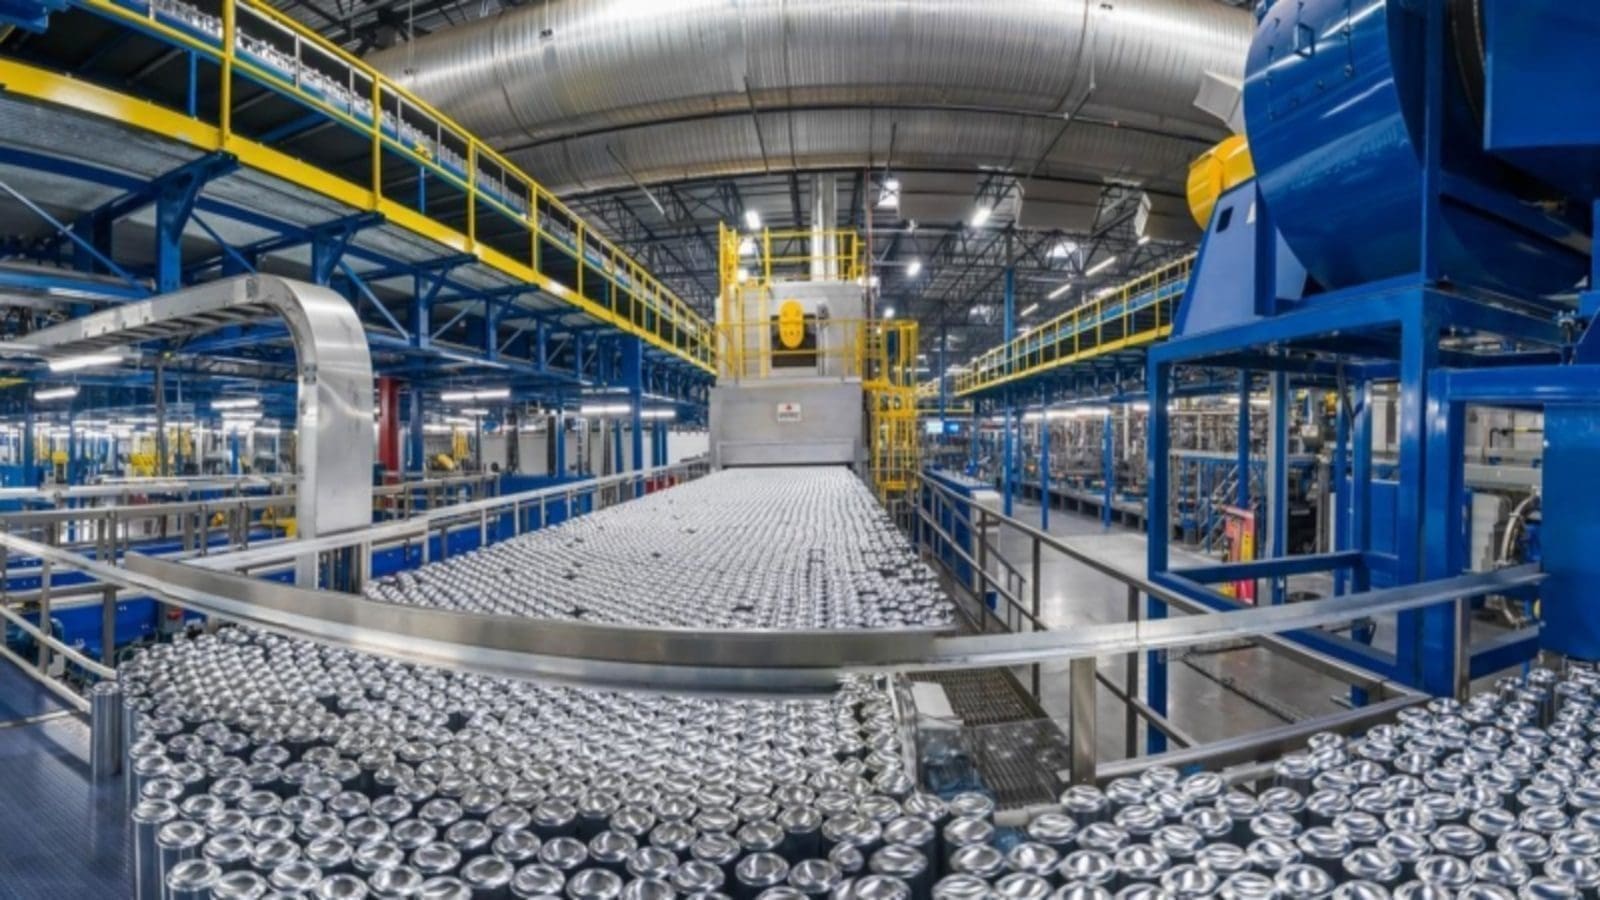 Ball Corp invests in new packaging plant in UK to meet accelerating demand for alumnium cans 